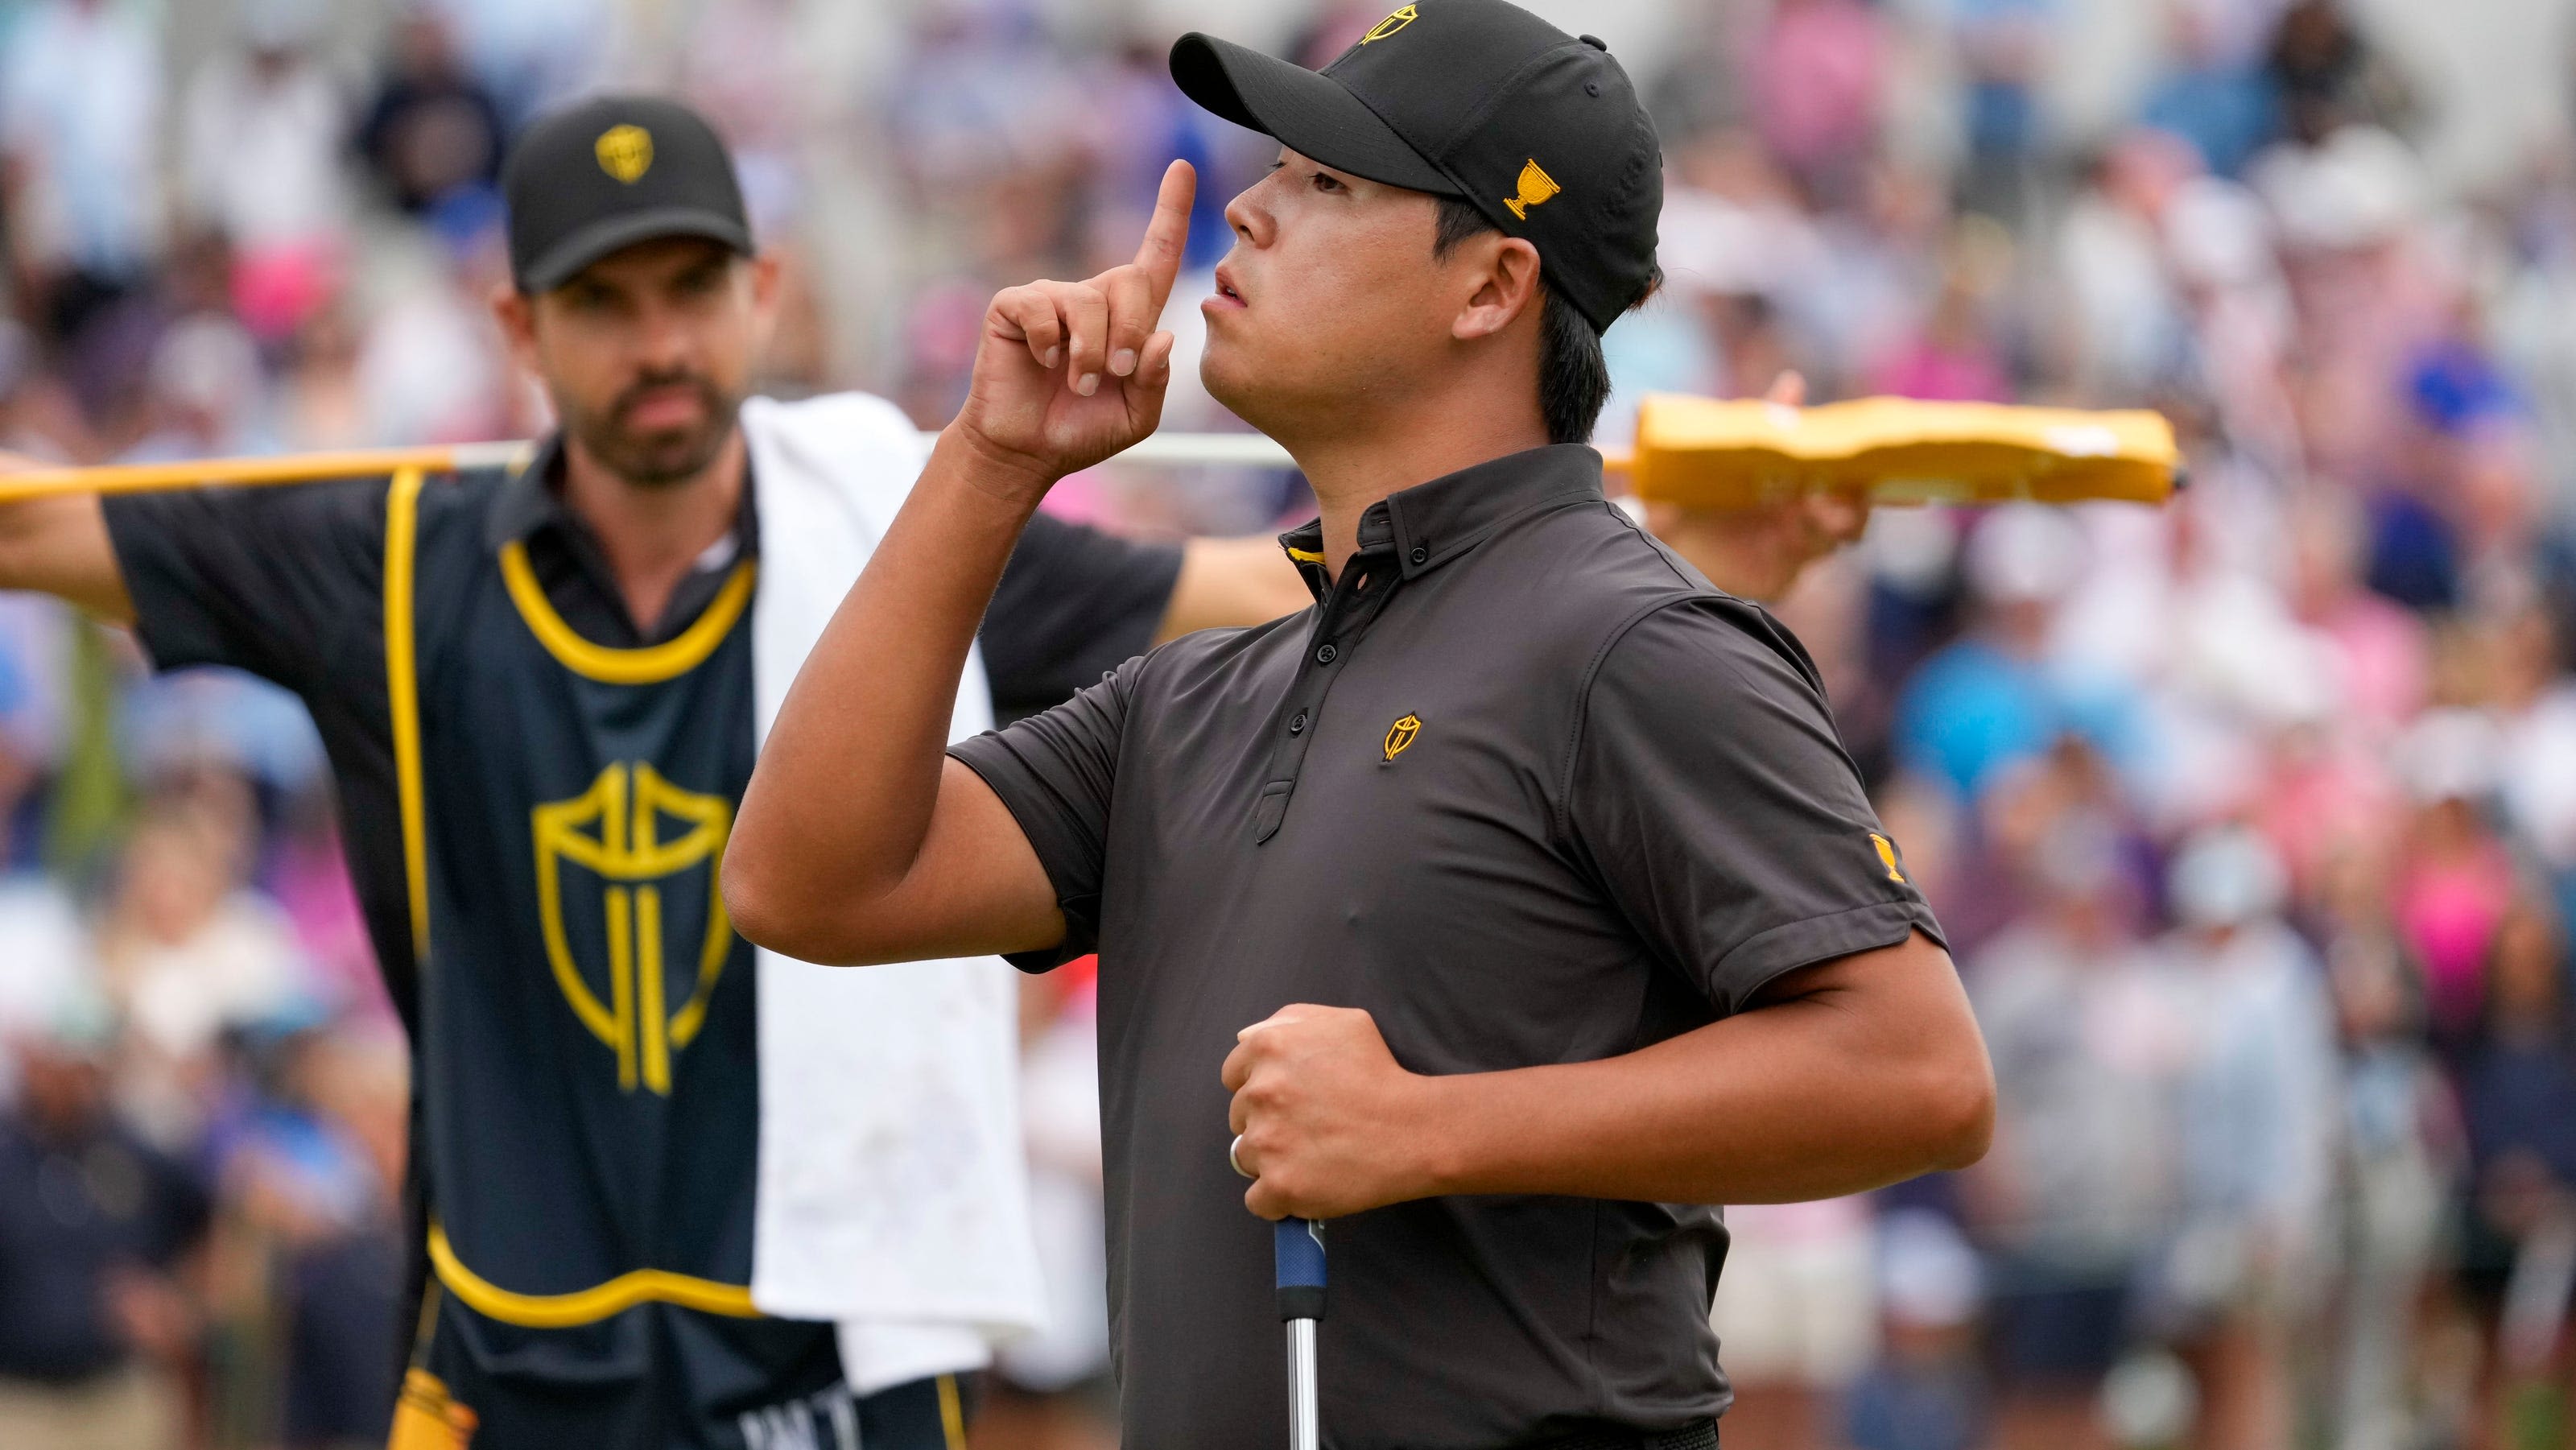 Si Woo Kim records first ever ace at Royal Troon's Hole 17 at The Open Saturday with hole-in-one